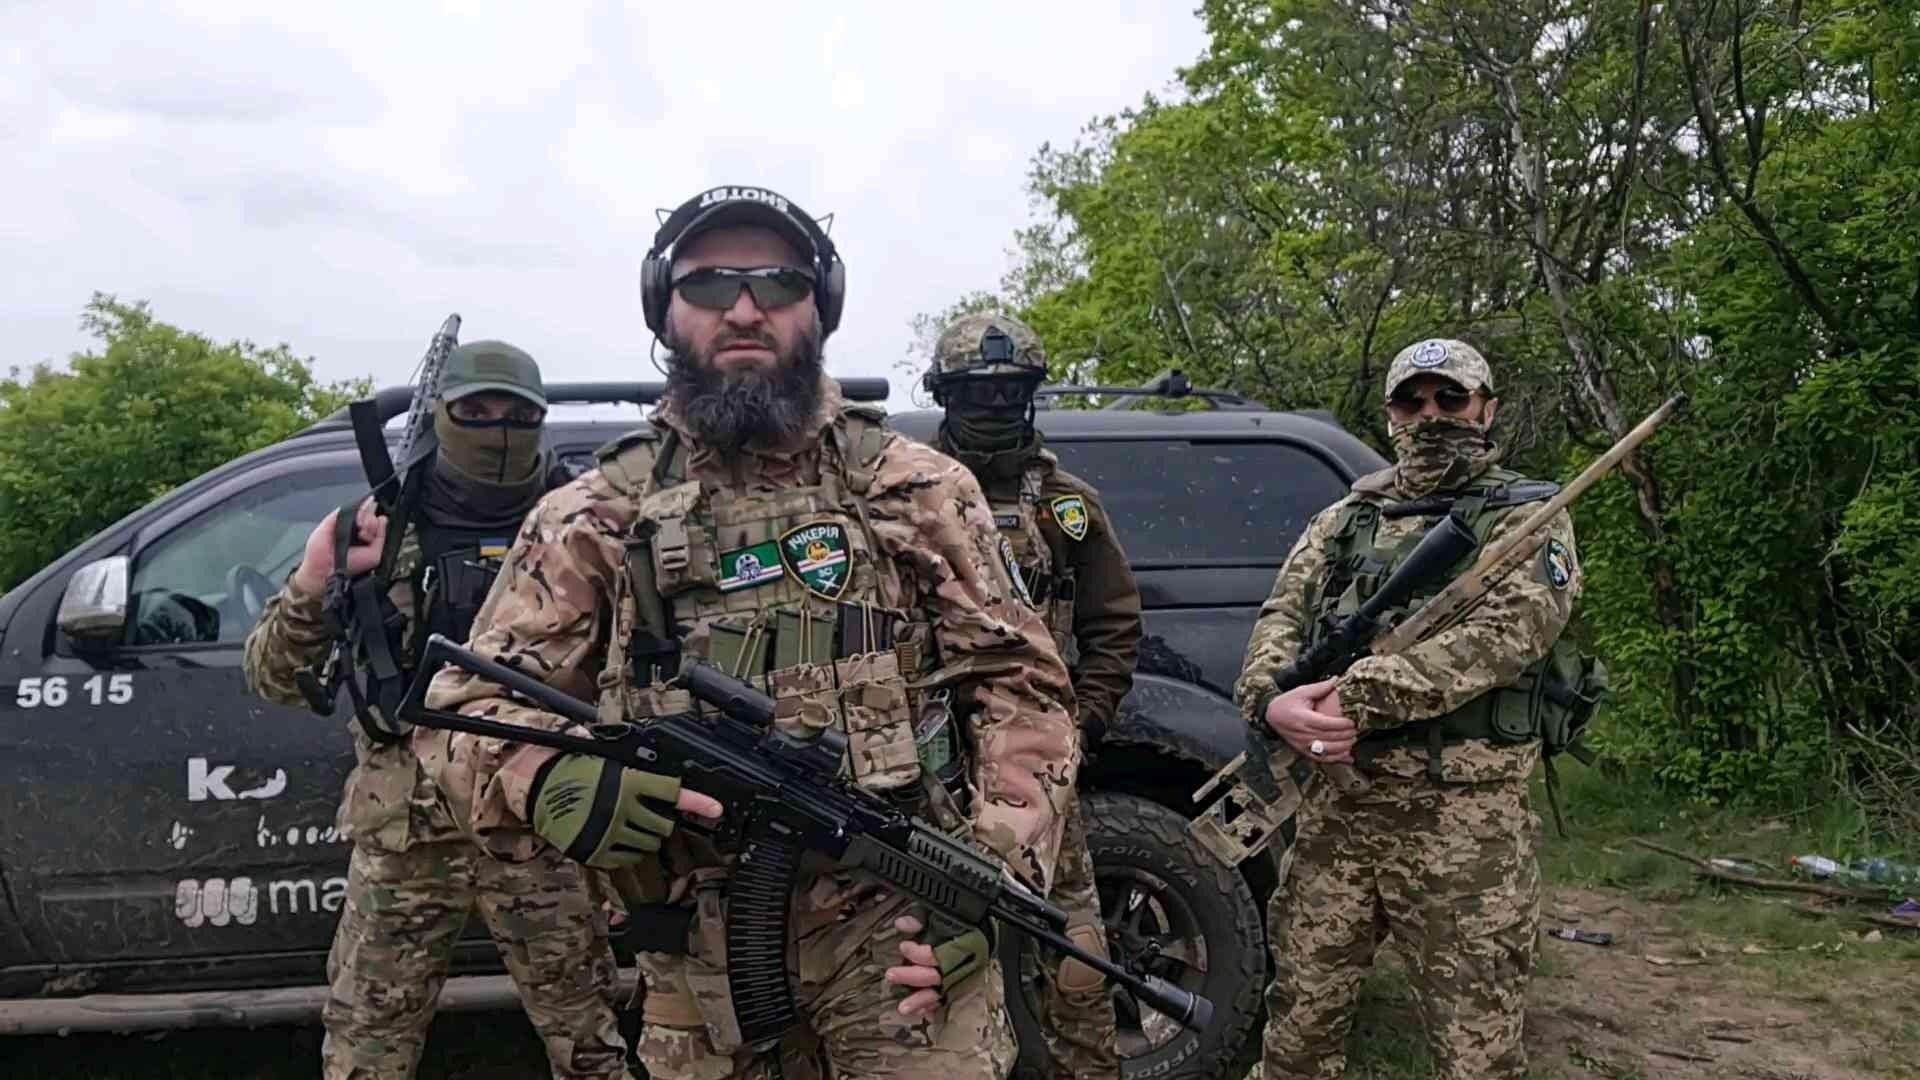 Chechen veteran battalion fighting Russia: ‘When Chechens are independent, they pick this side’